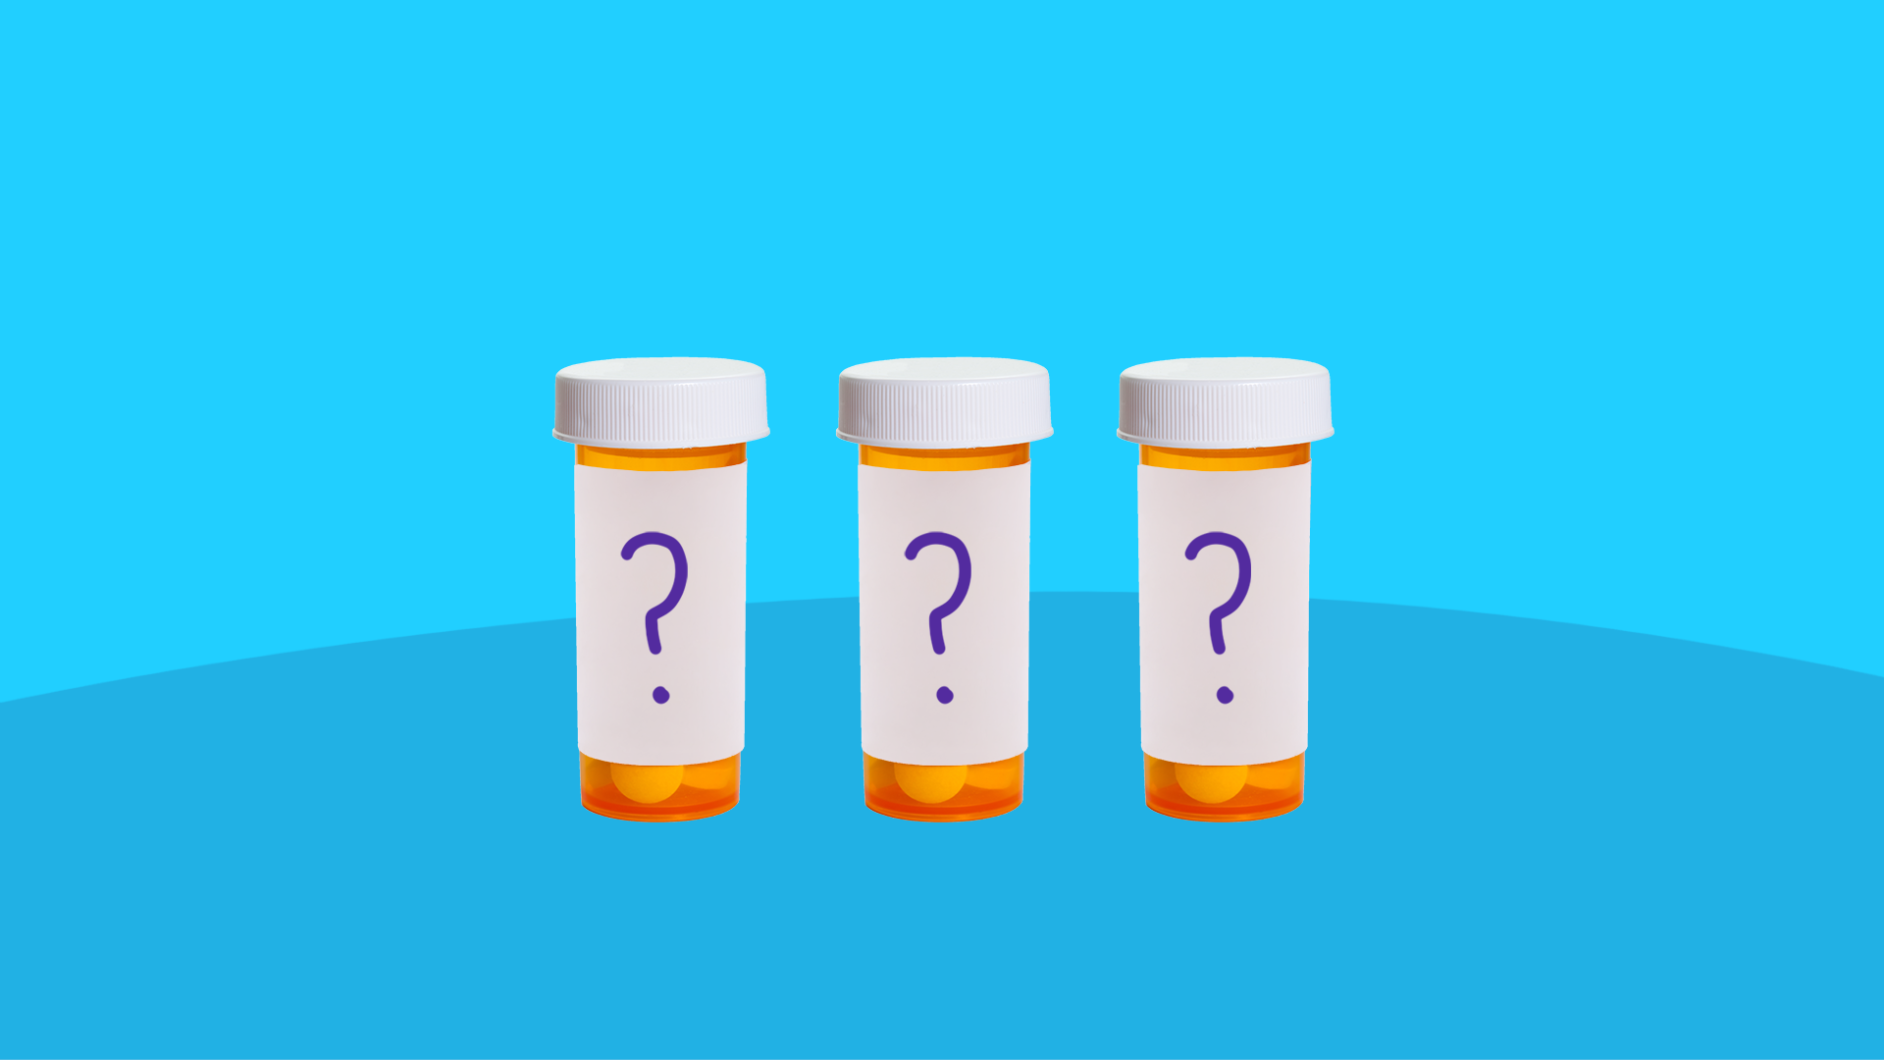 Rx pill bottles with question mark lable: Tylenol with Codeine, Hydrocodone, or Oxycodone